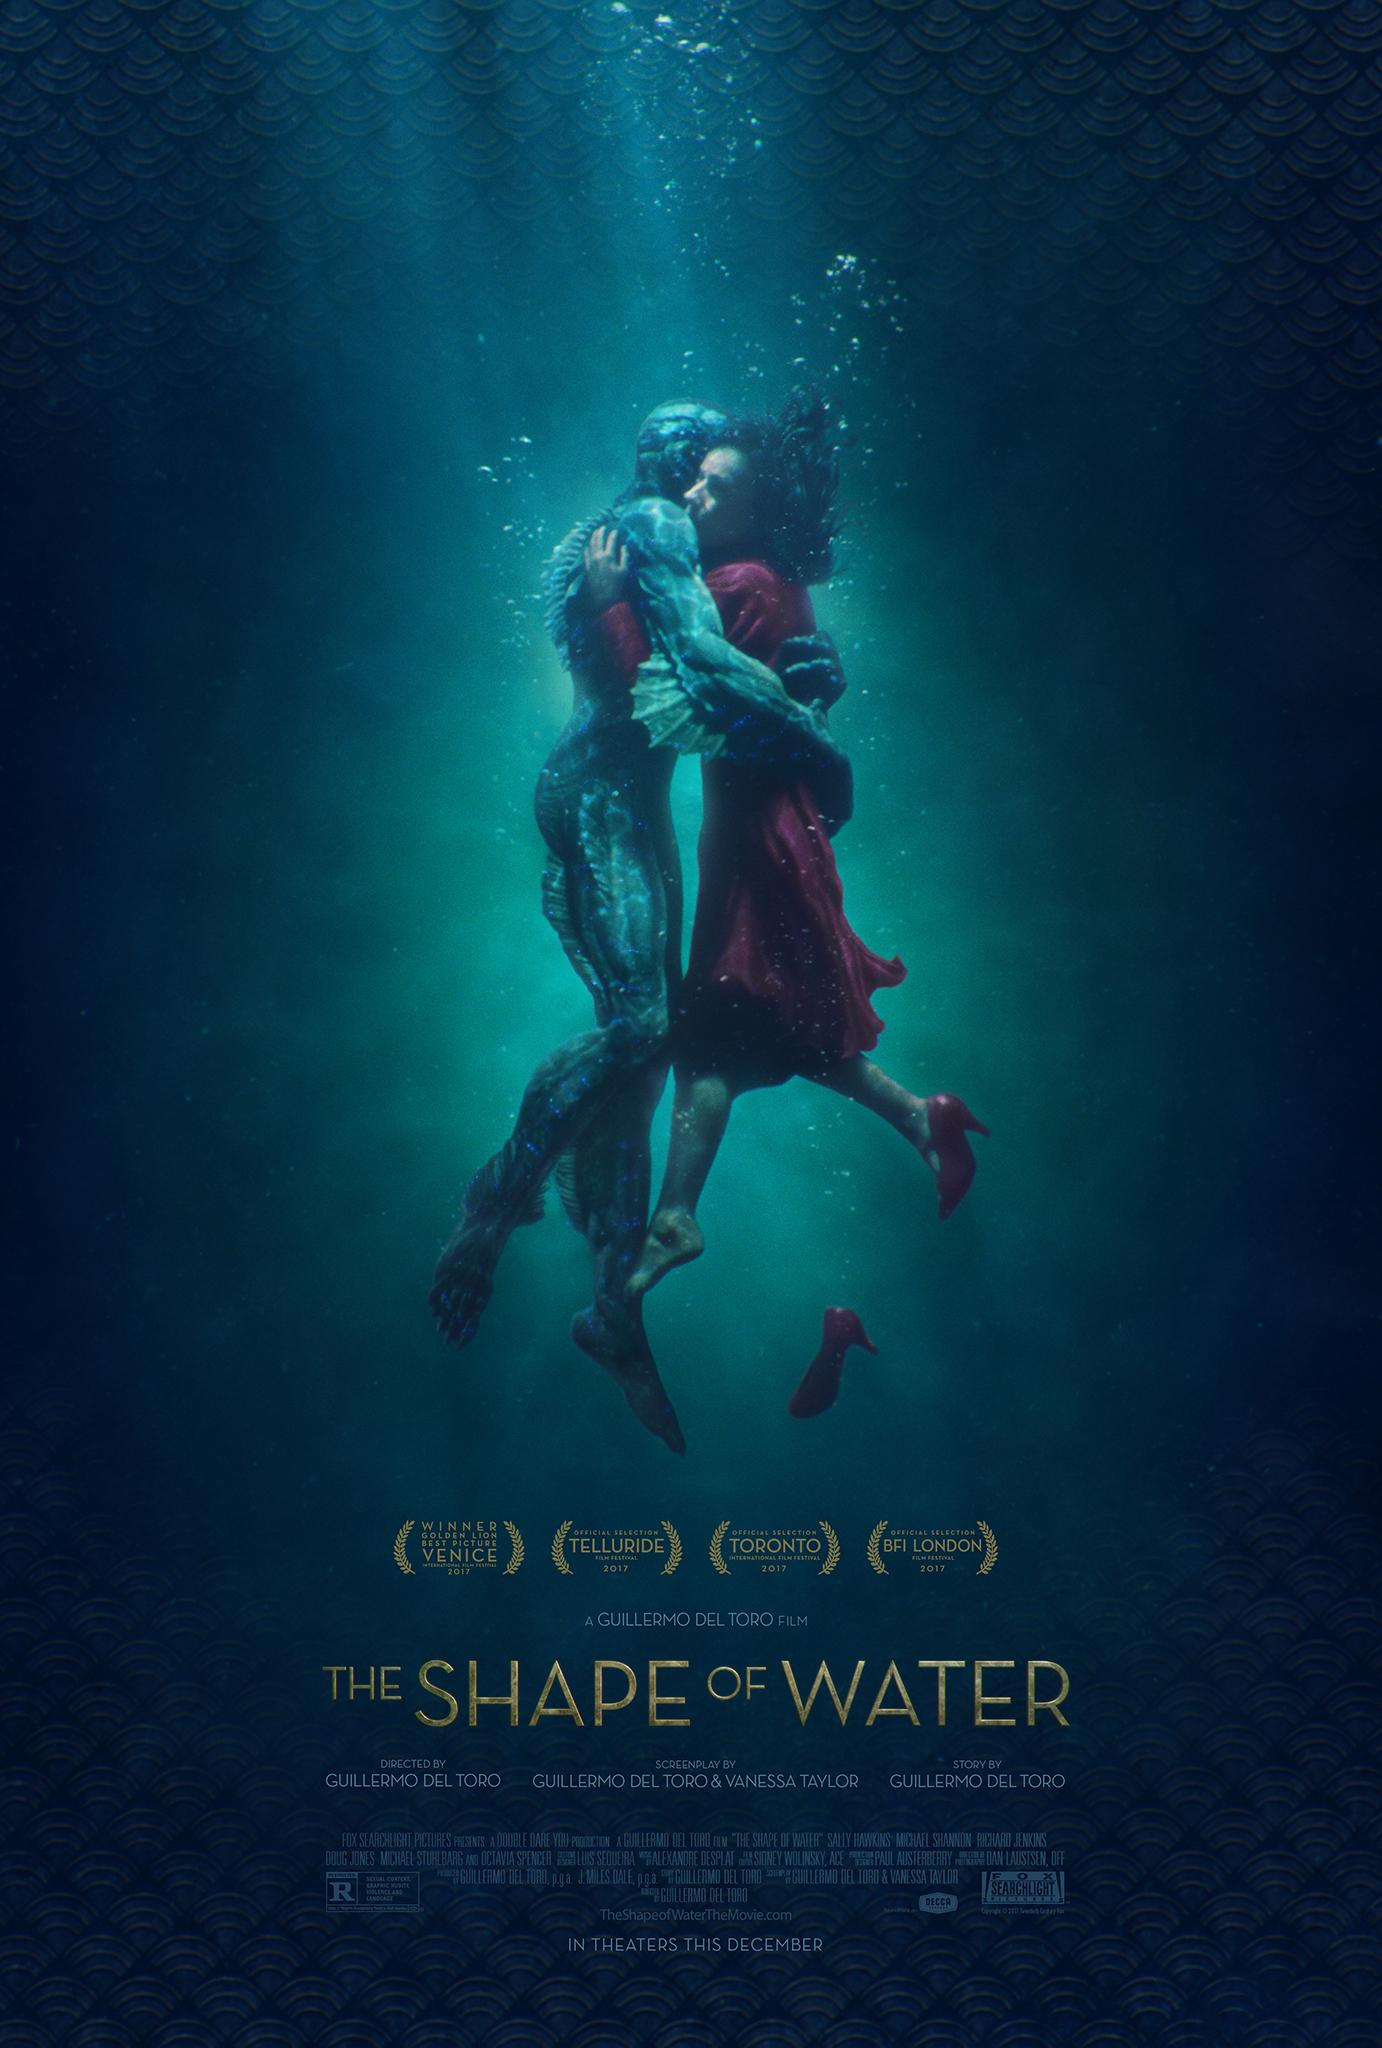 http://www.flayrah.com/sites/default/files/u/2cross2affliction/The-Shape-of-Water-poster-2-large.jpg